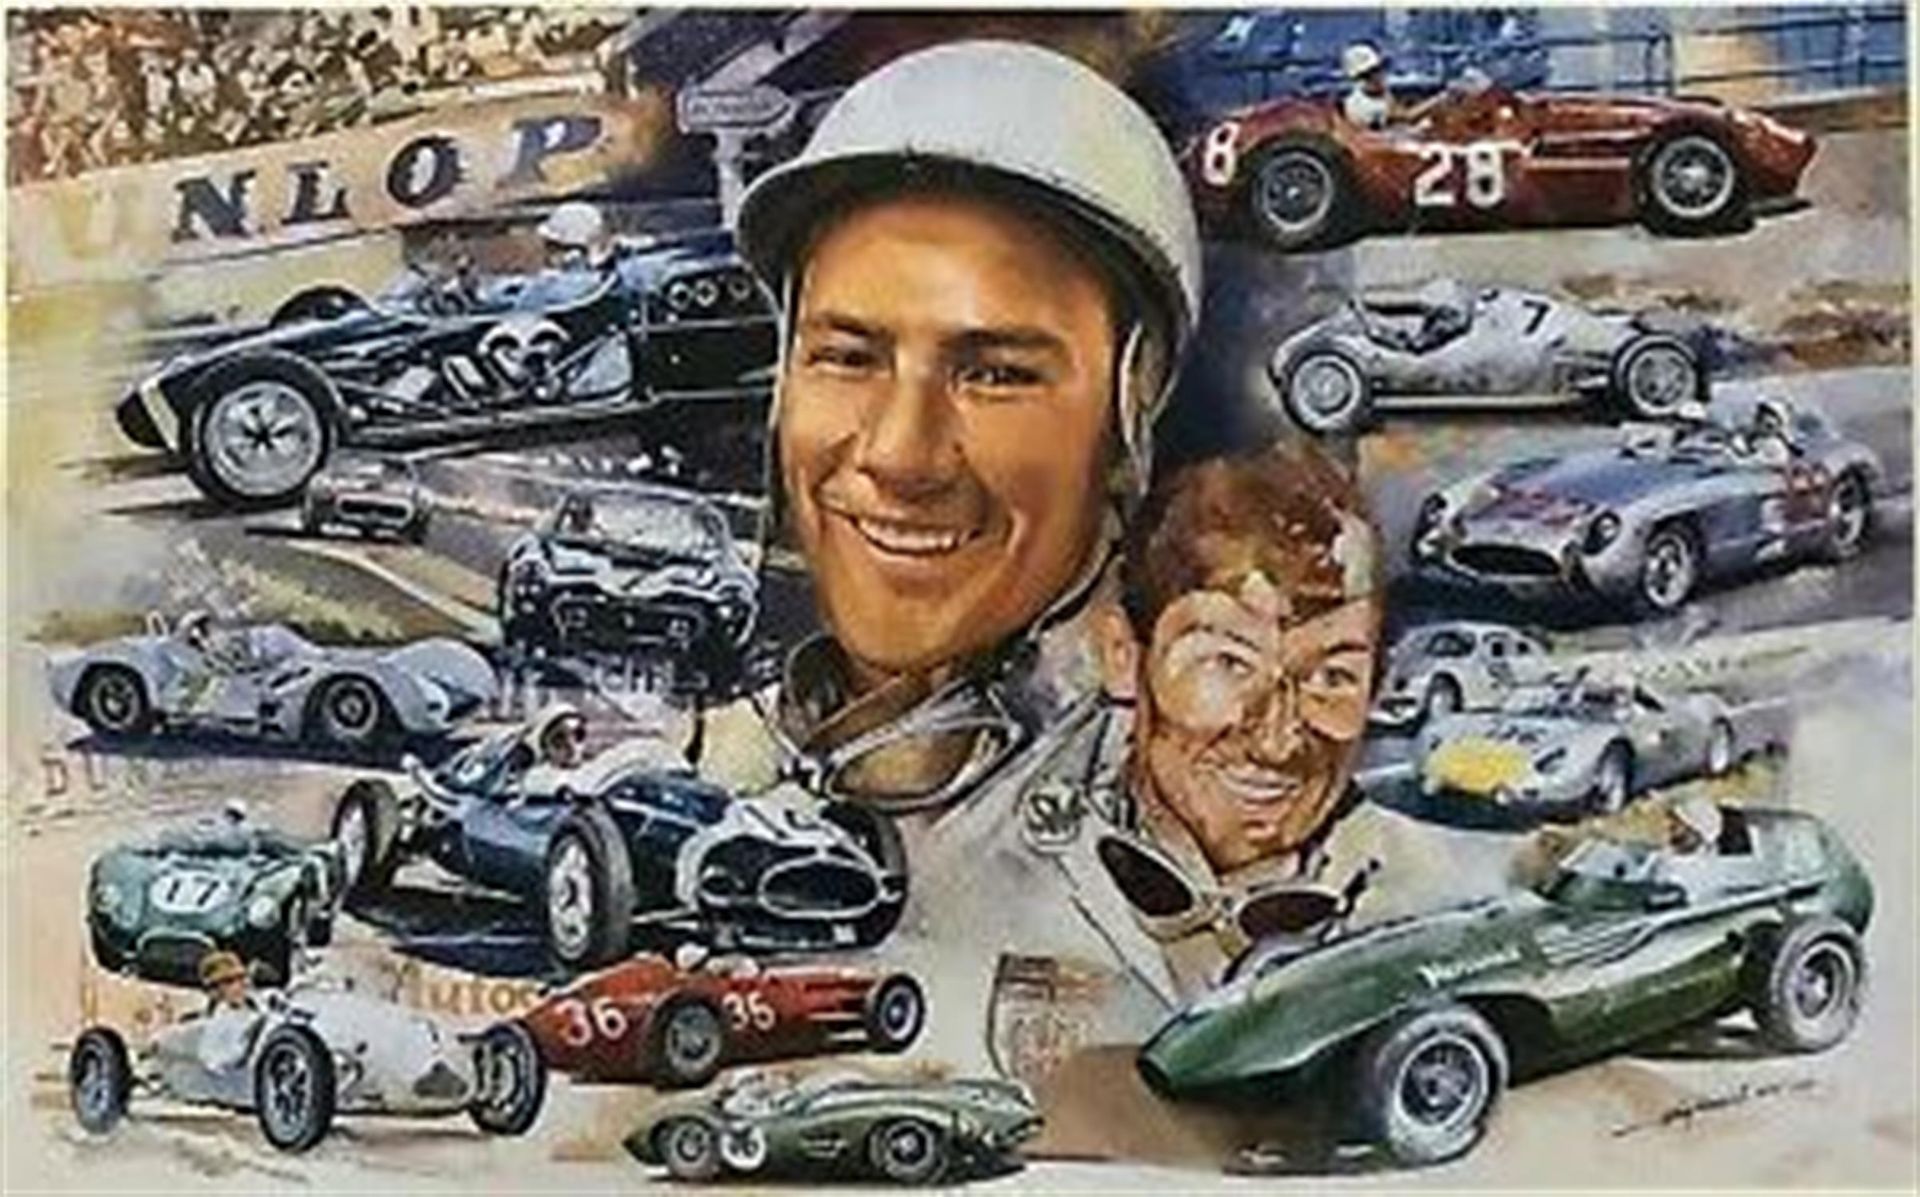 'Still Going Strong at 80' Sir Stirling Moss OBE - signed Original Artwork by Craig Warwick